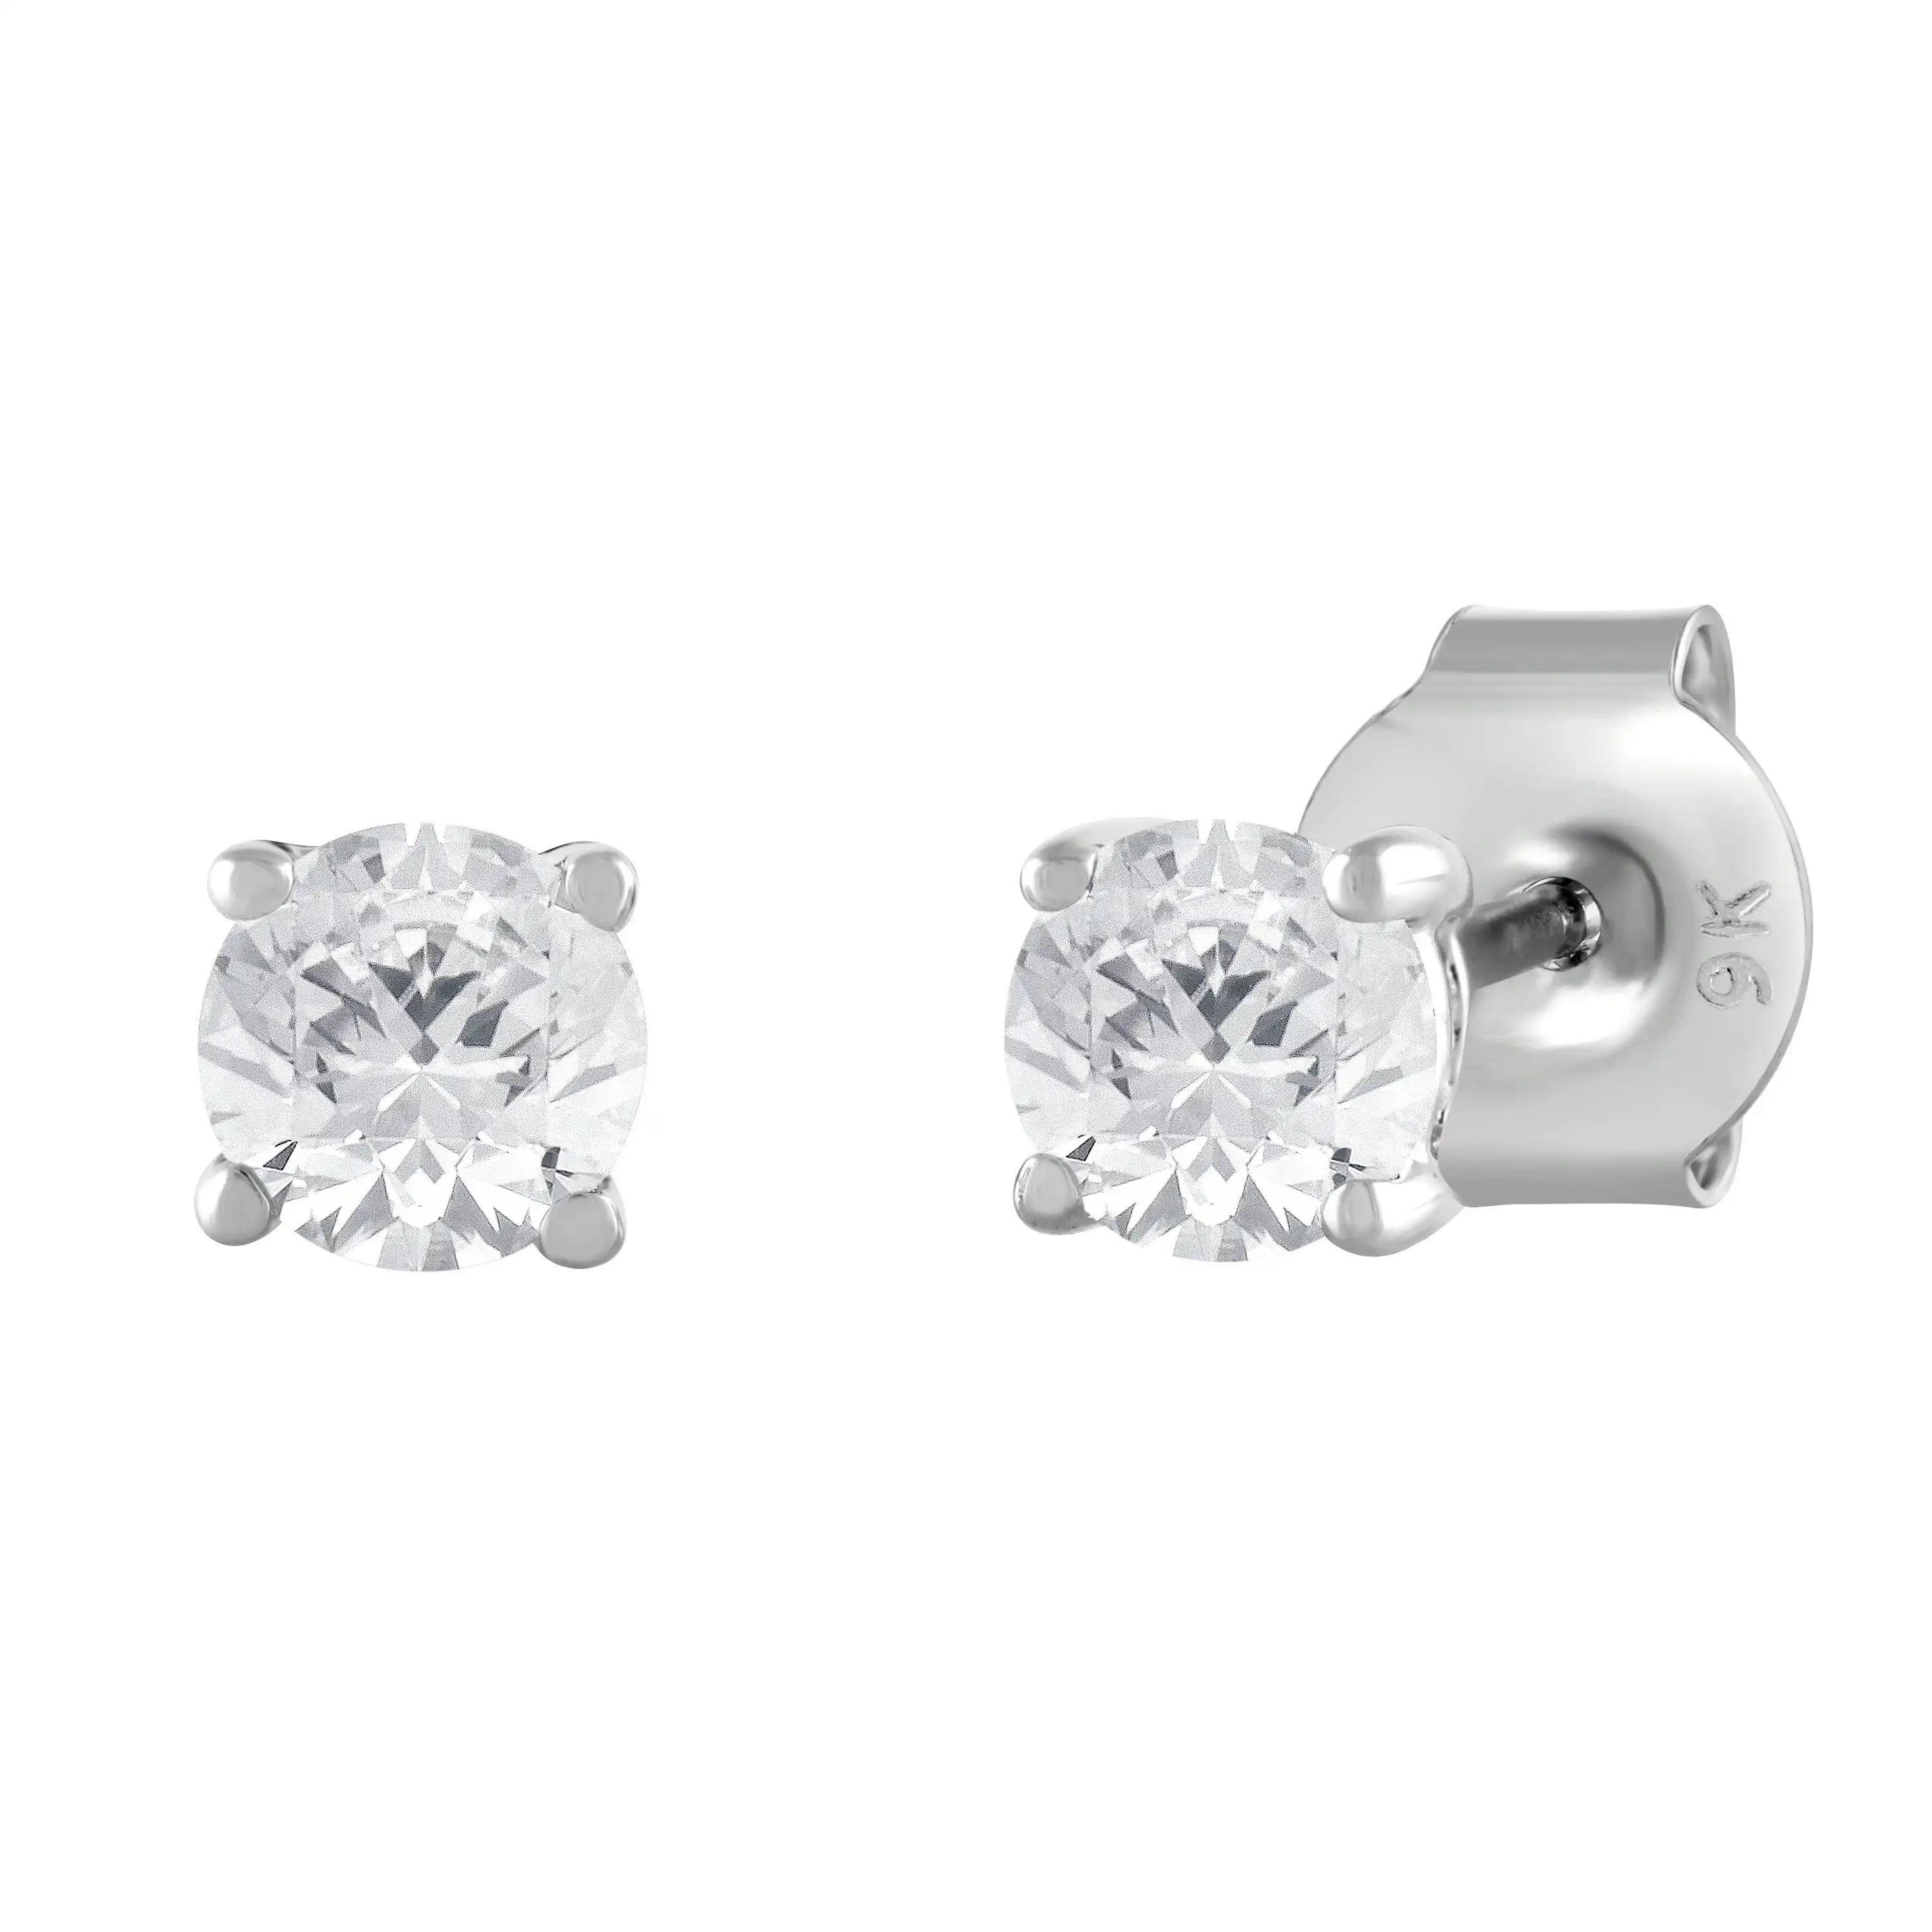 Meera Stud Earrings with 1/2ct of Laboratory Grown Diamonds in 9ct White Gold